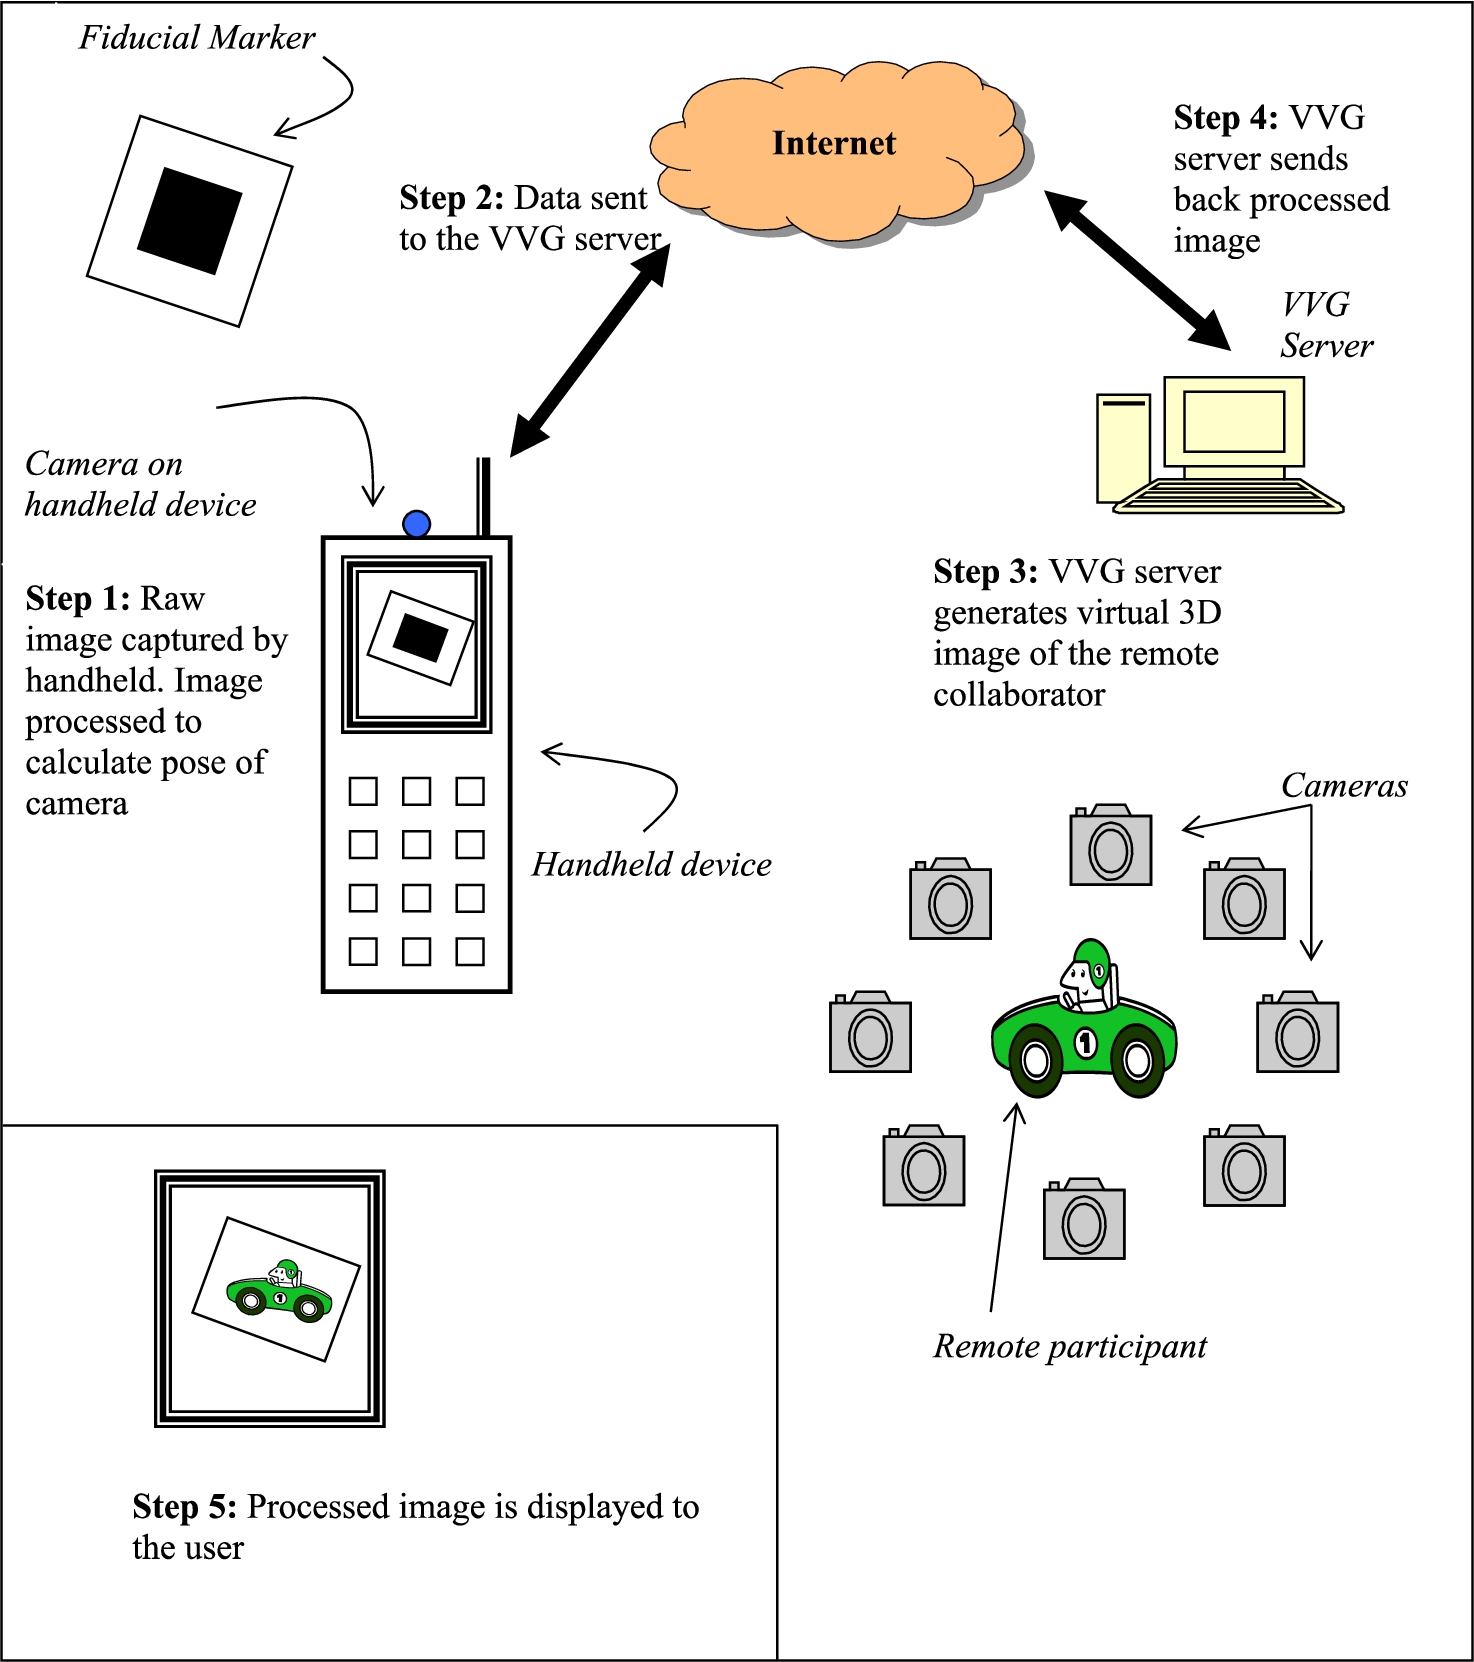 System operation overview.